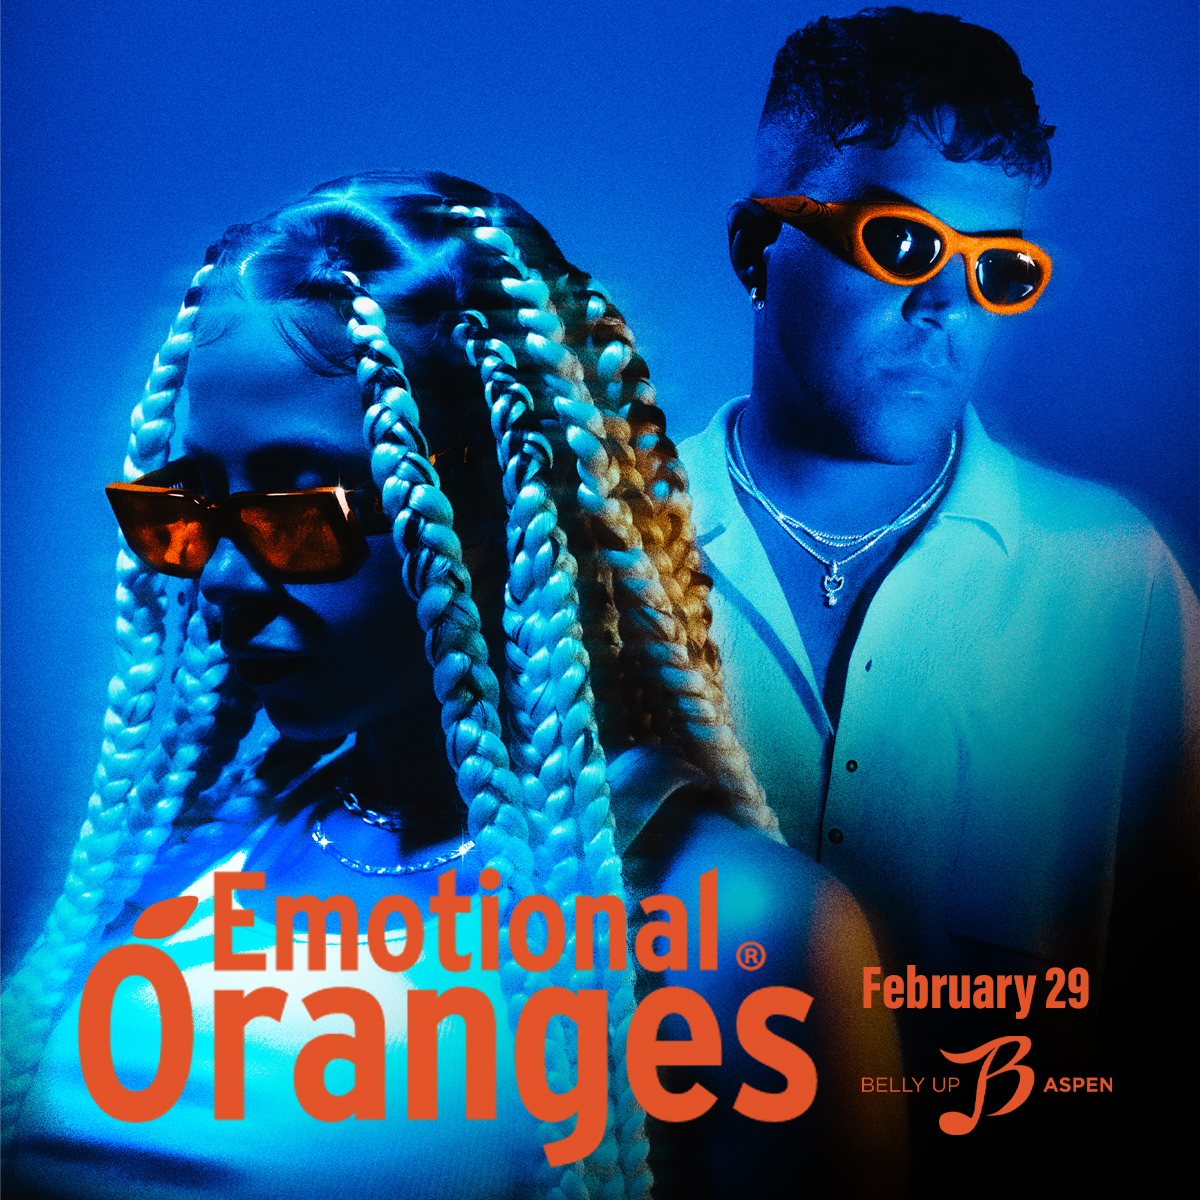 Soulful R&B duo @EmotionalOrange debuts 2/29! Presale starts Thu, 1/11 @ 11am MT. Sign up by 8:30am MT on 1/11 to receive the presale code: bit.ly/3MSARpt